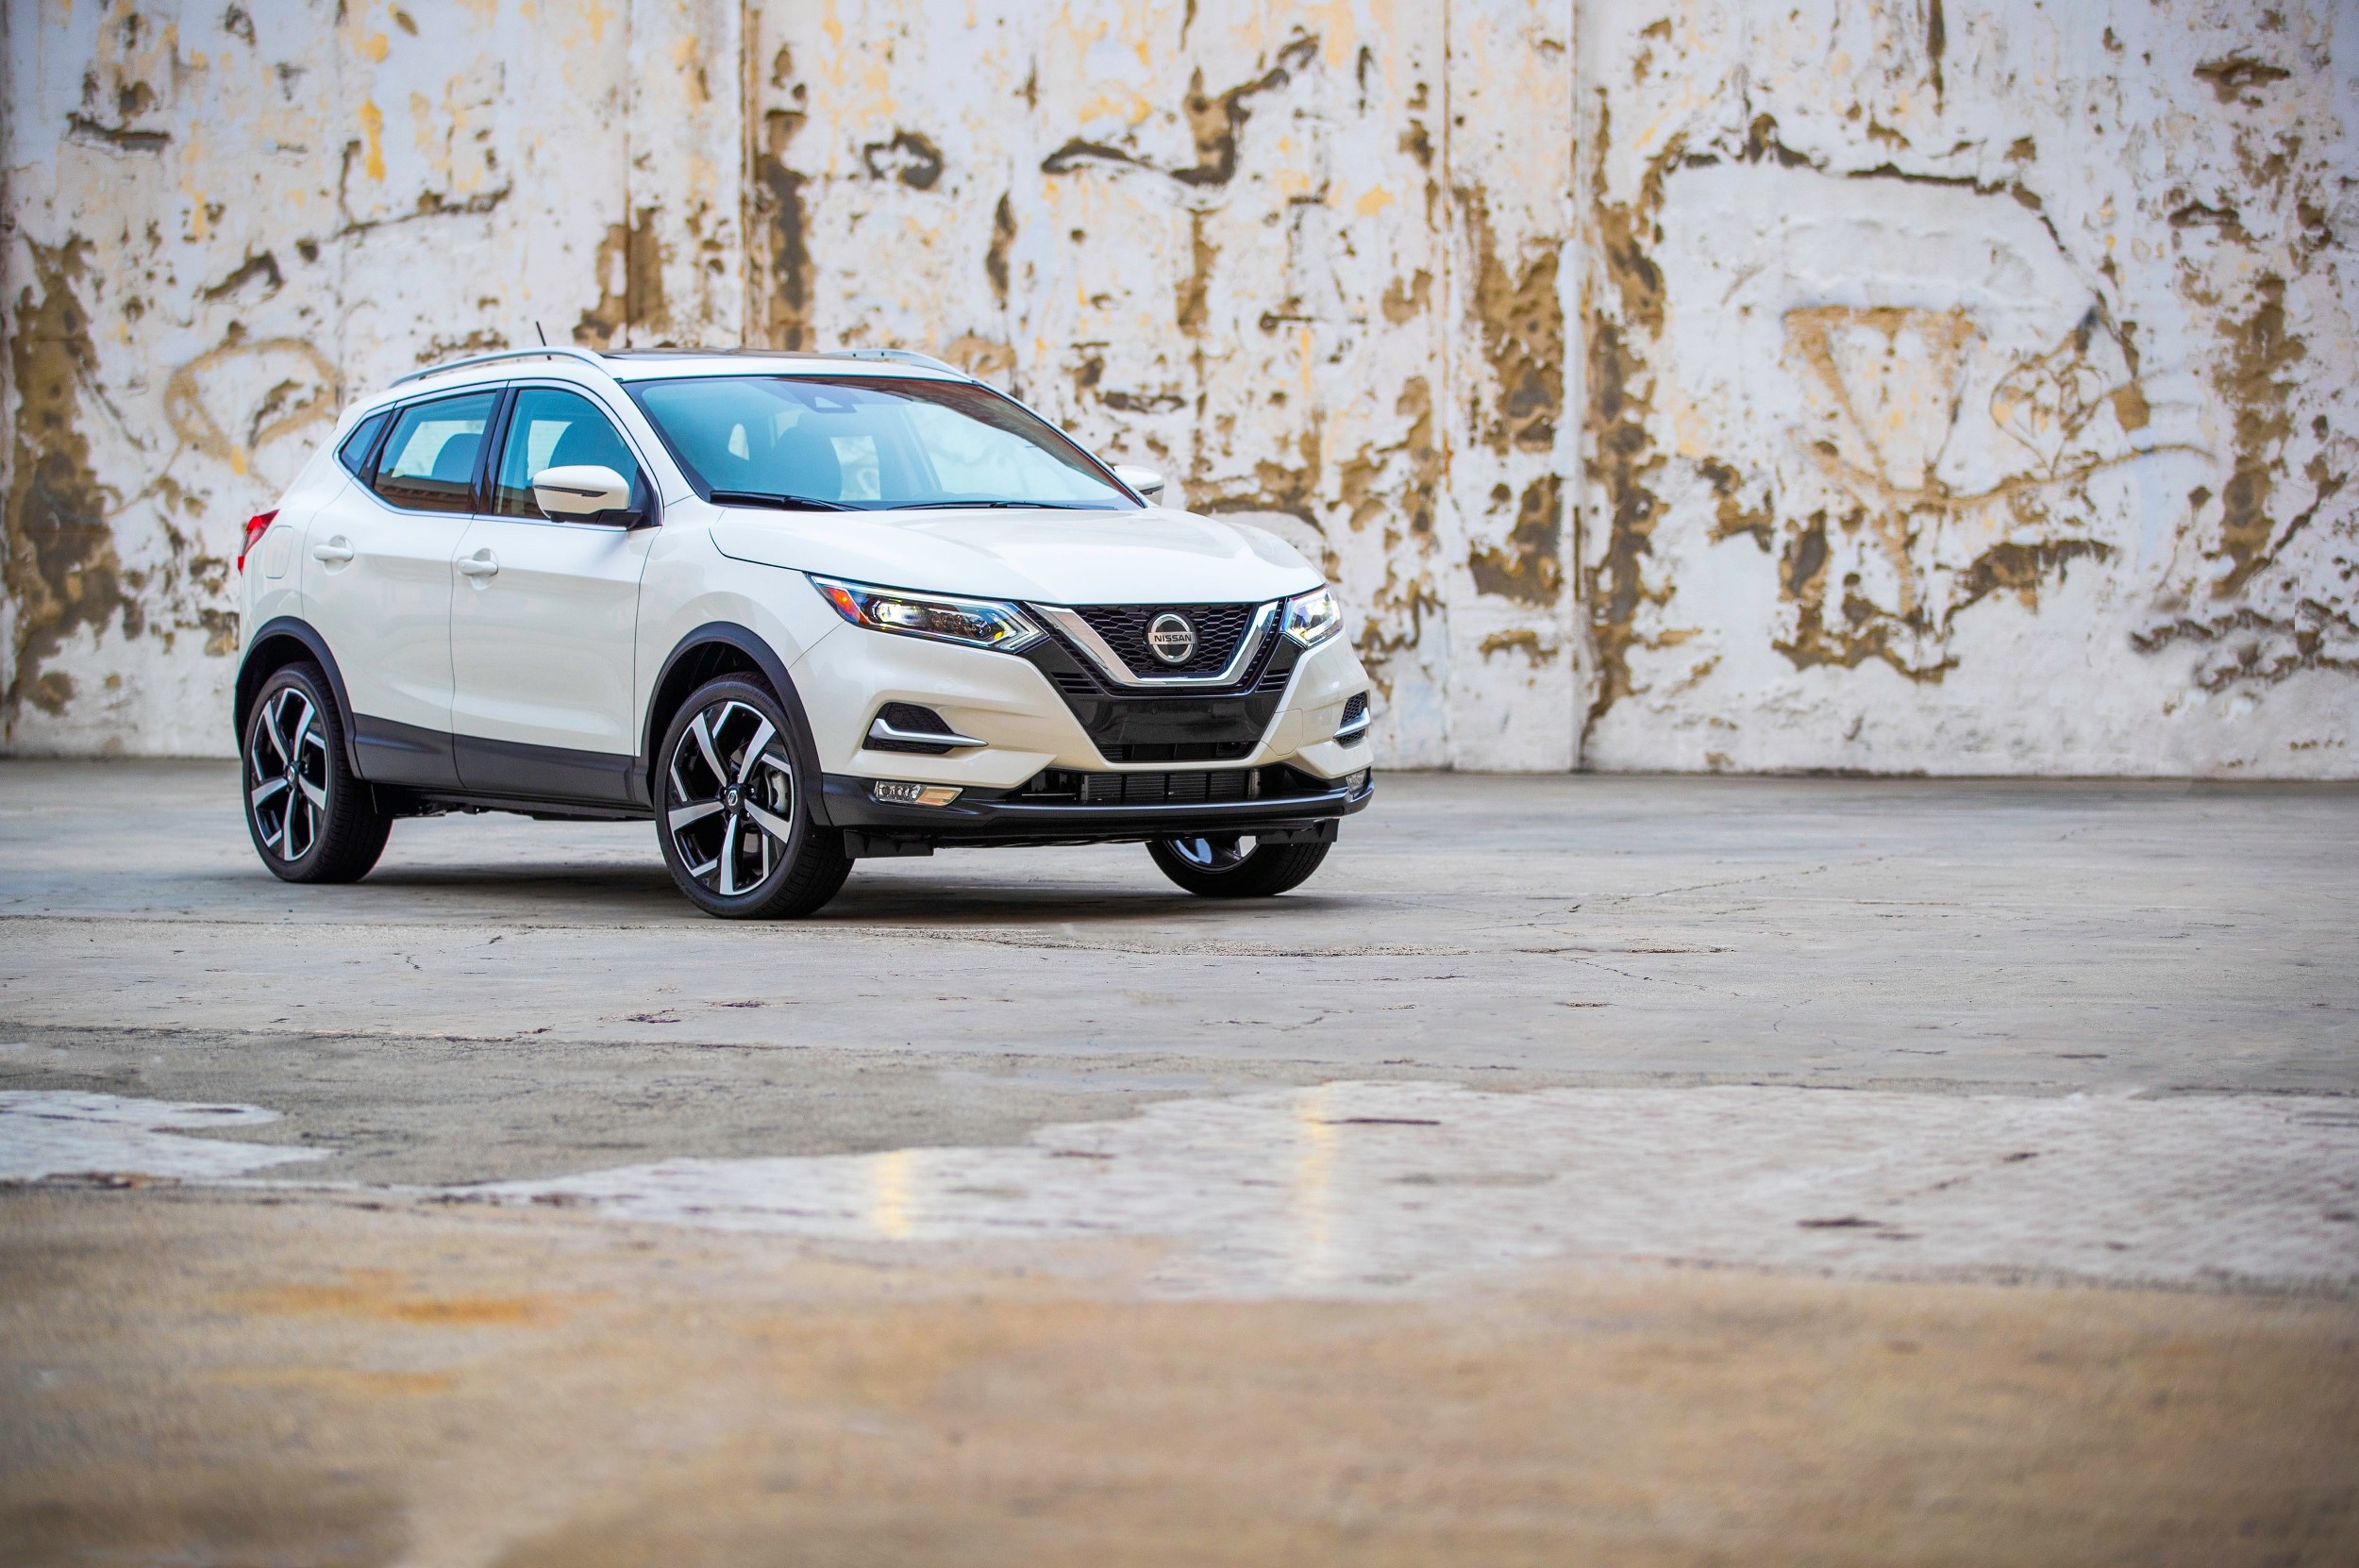 Redesigned 2020 Nissan Rogue Sport Introduced With Bolder V-Motion